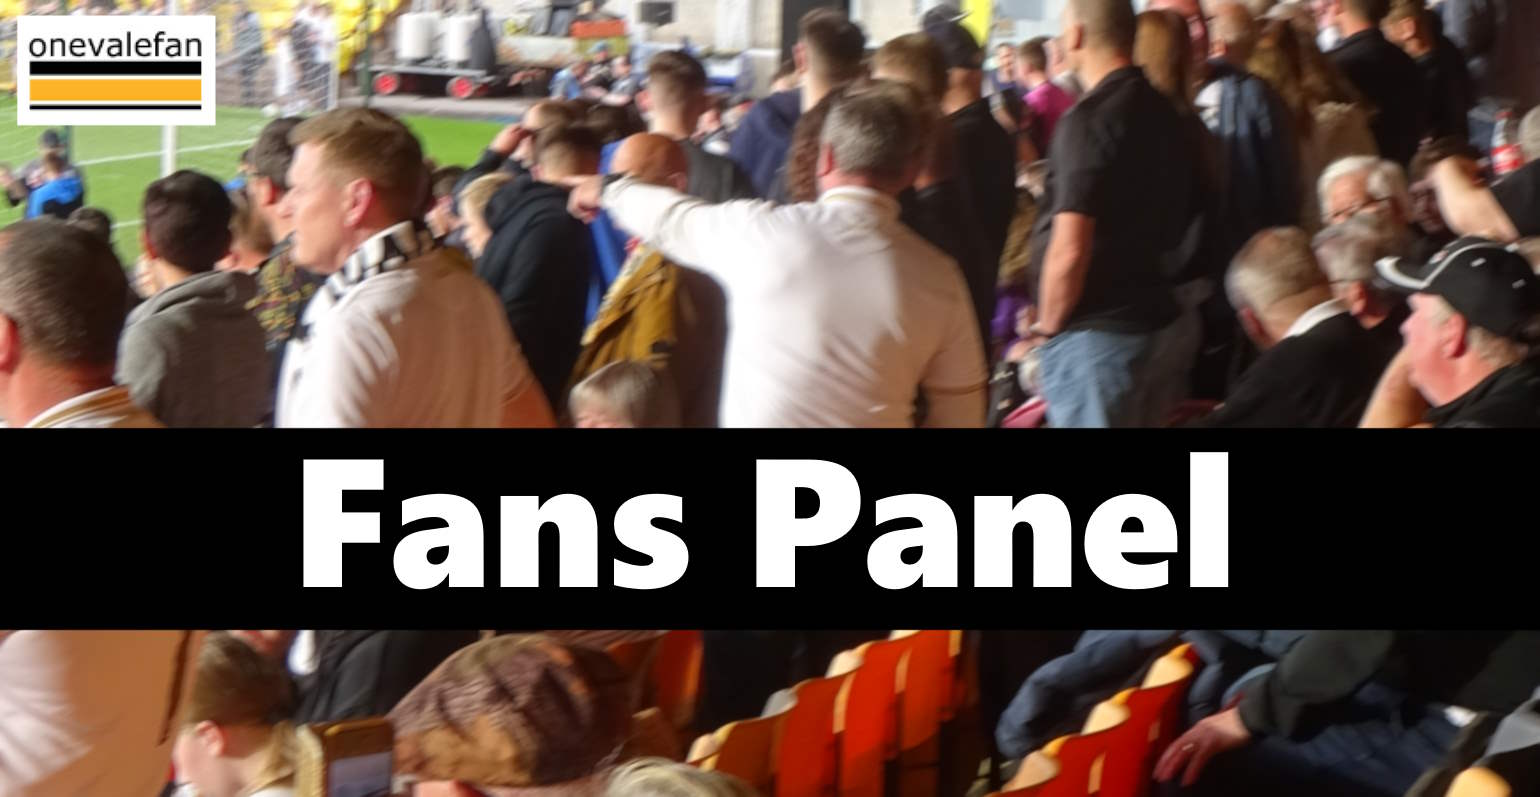 Port Vale Fans Panel special – last season was shambolic, it’s a huge summer and Vale need to focus on things on the pitch